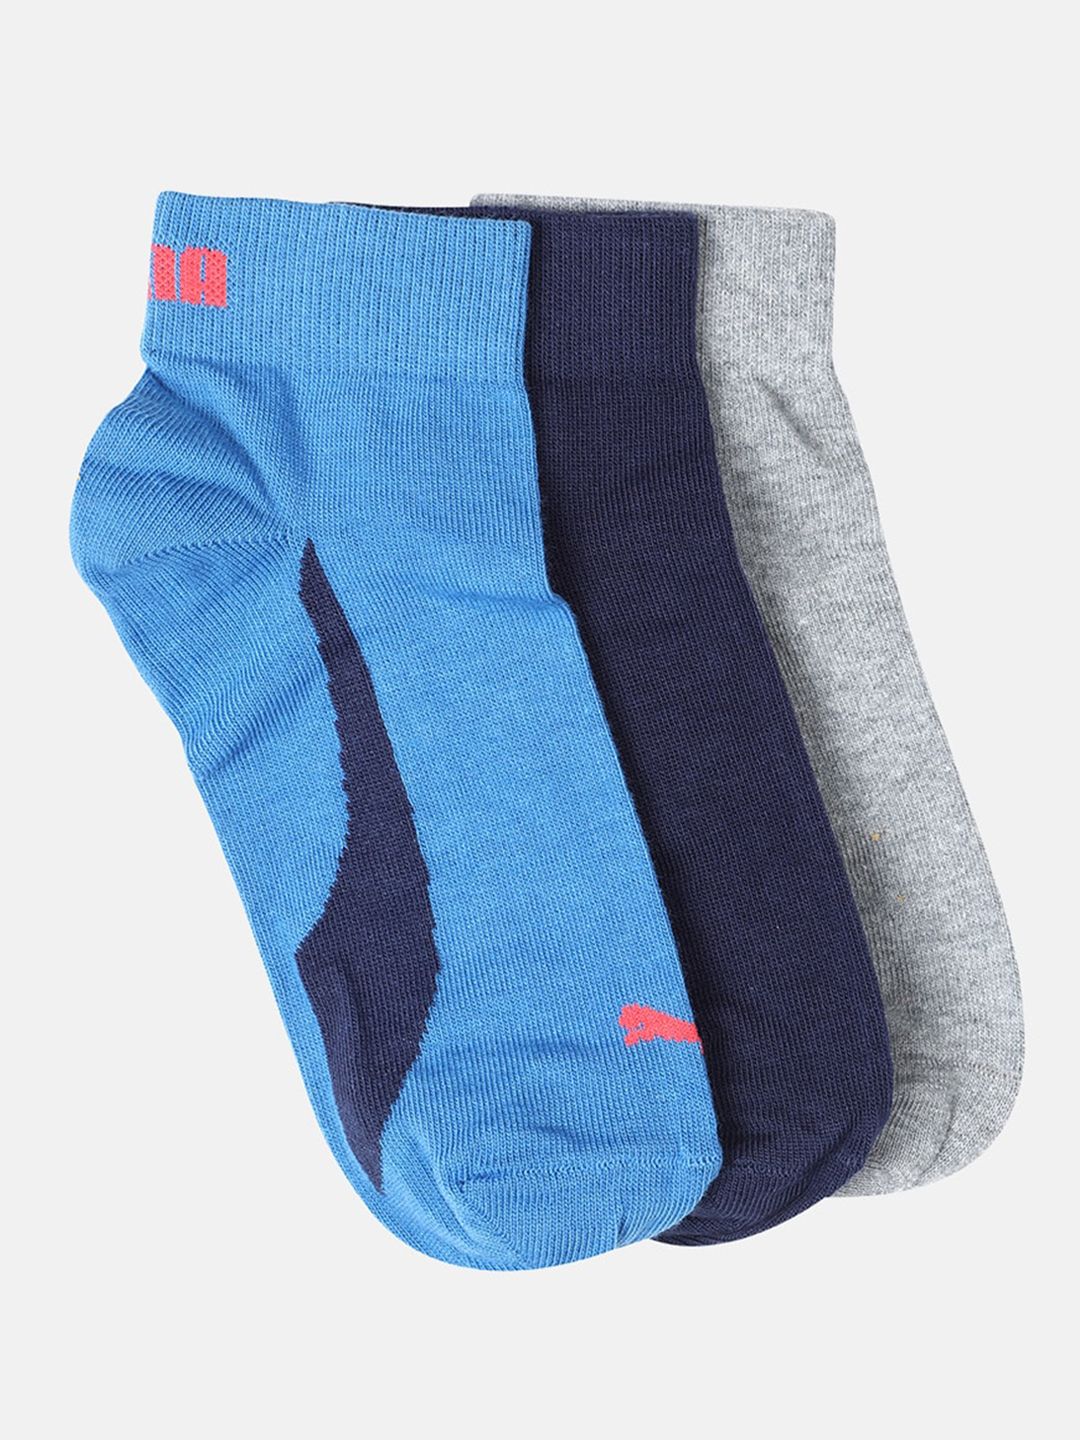 Puma Adults Multicoloured Pack of 3 Colourblocked Ankle Length Socks Price in India